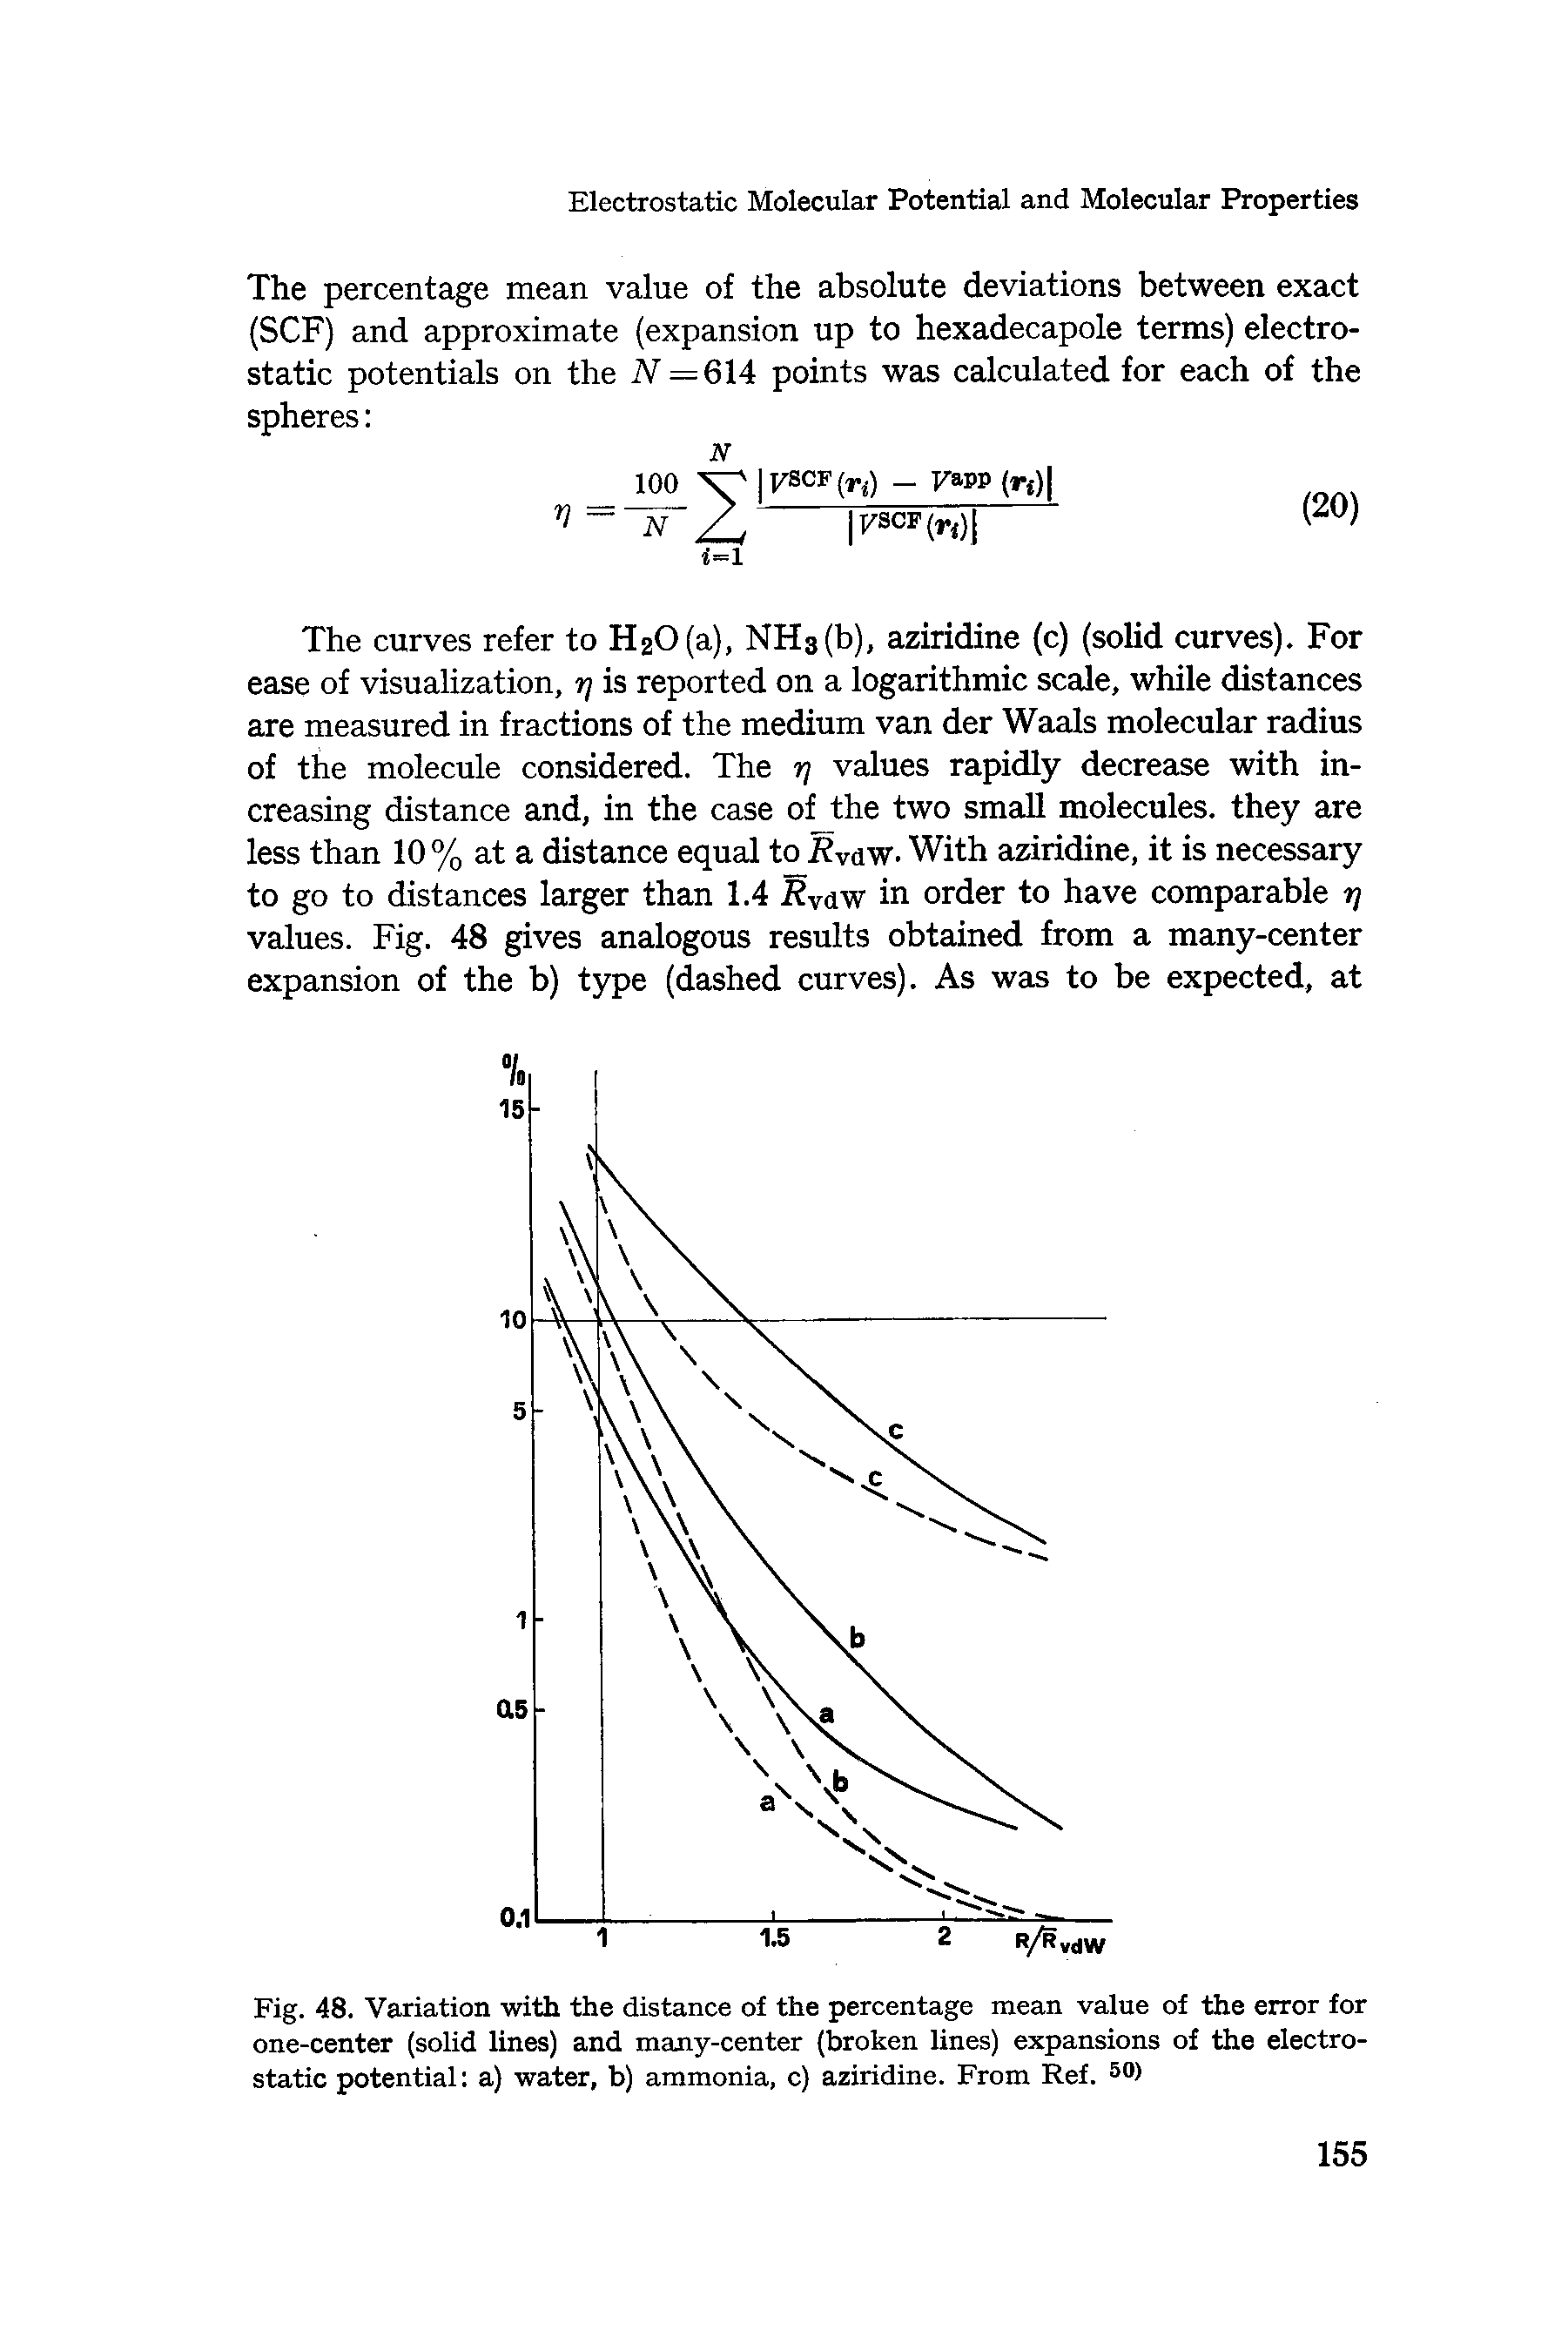 Fig. 48. Variation with the distance of the percentage mean value of the error for one-center (solid lines) and many-center (broken lines) expansions of the electrostatic potential a) water, b) ammonia, c) aziridine. From Ref. 50>...